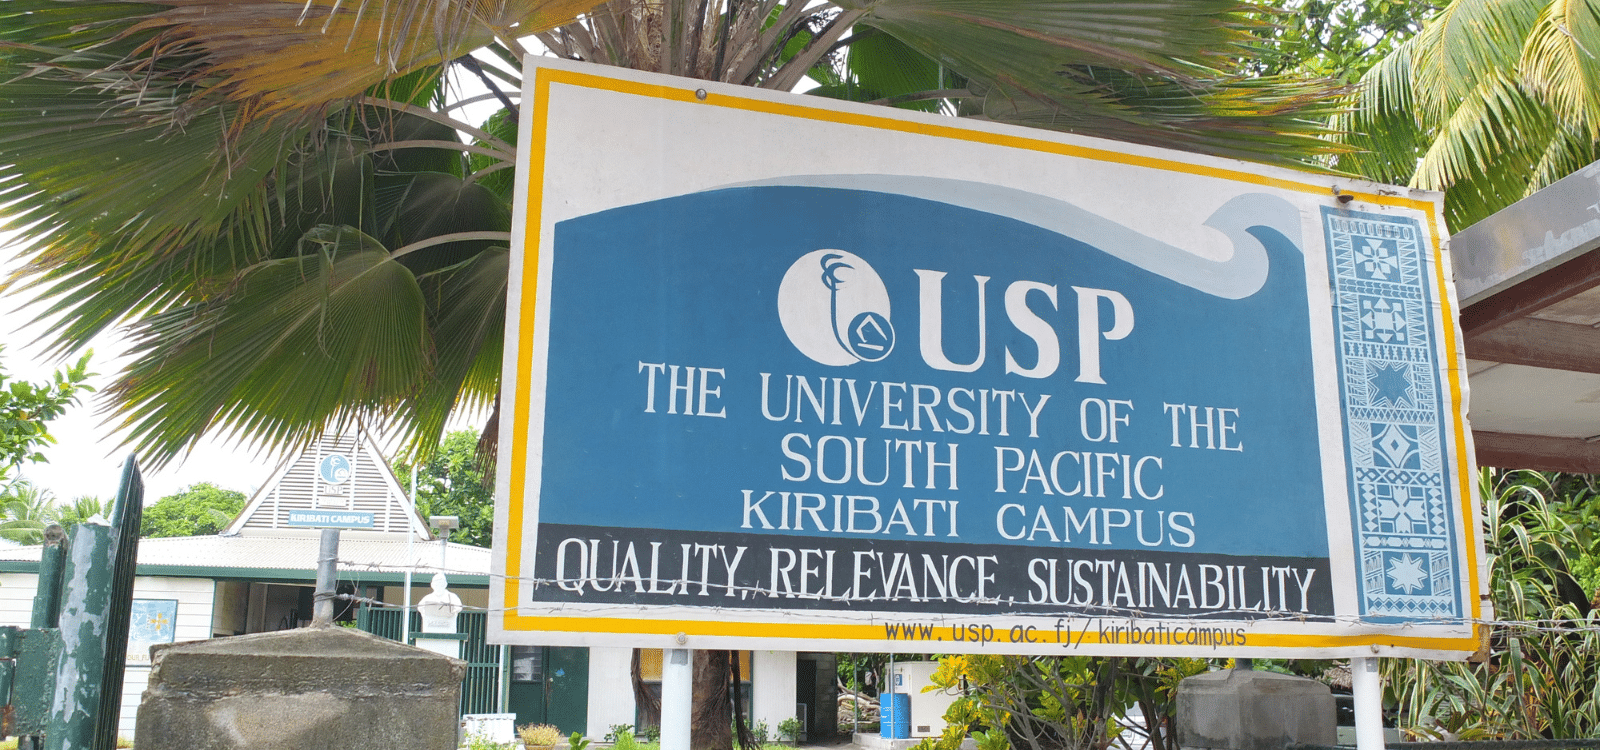 University of the South Pacific Campus